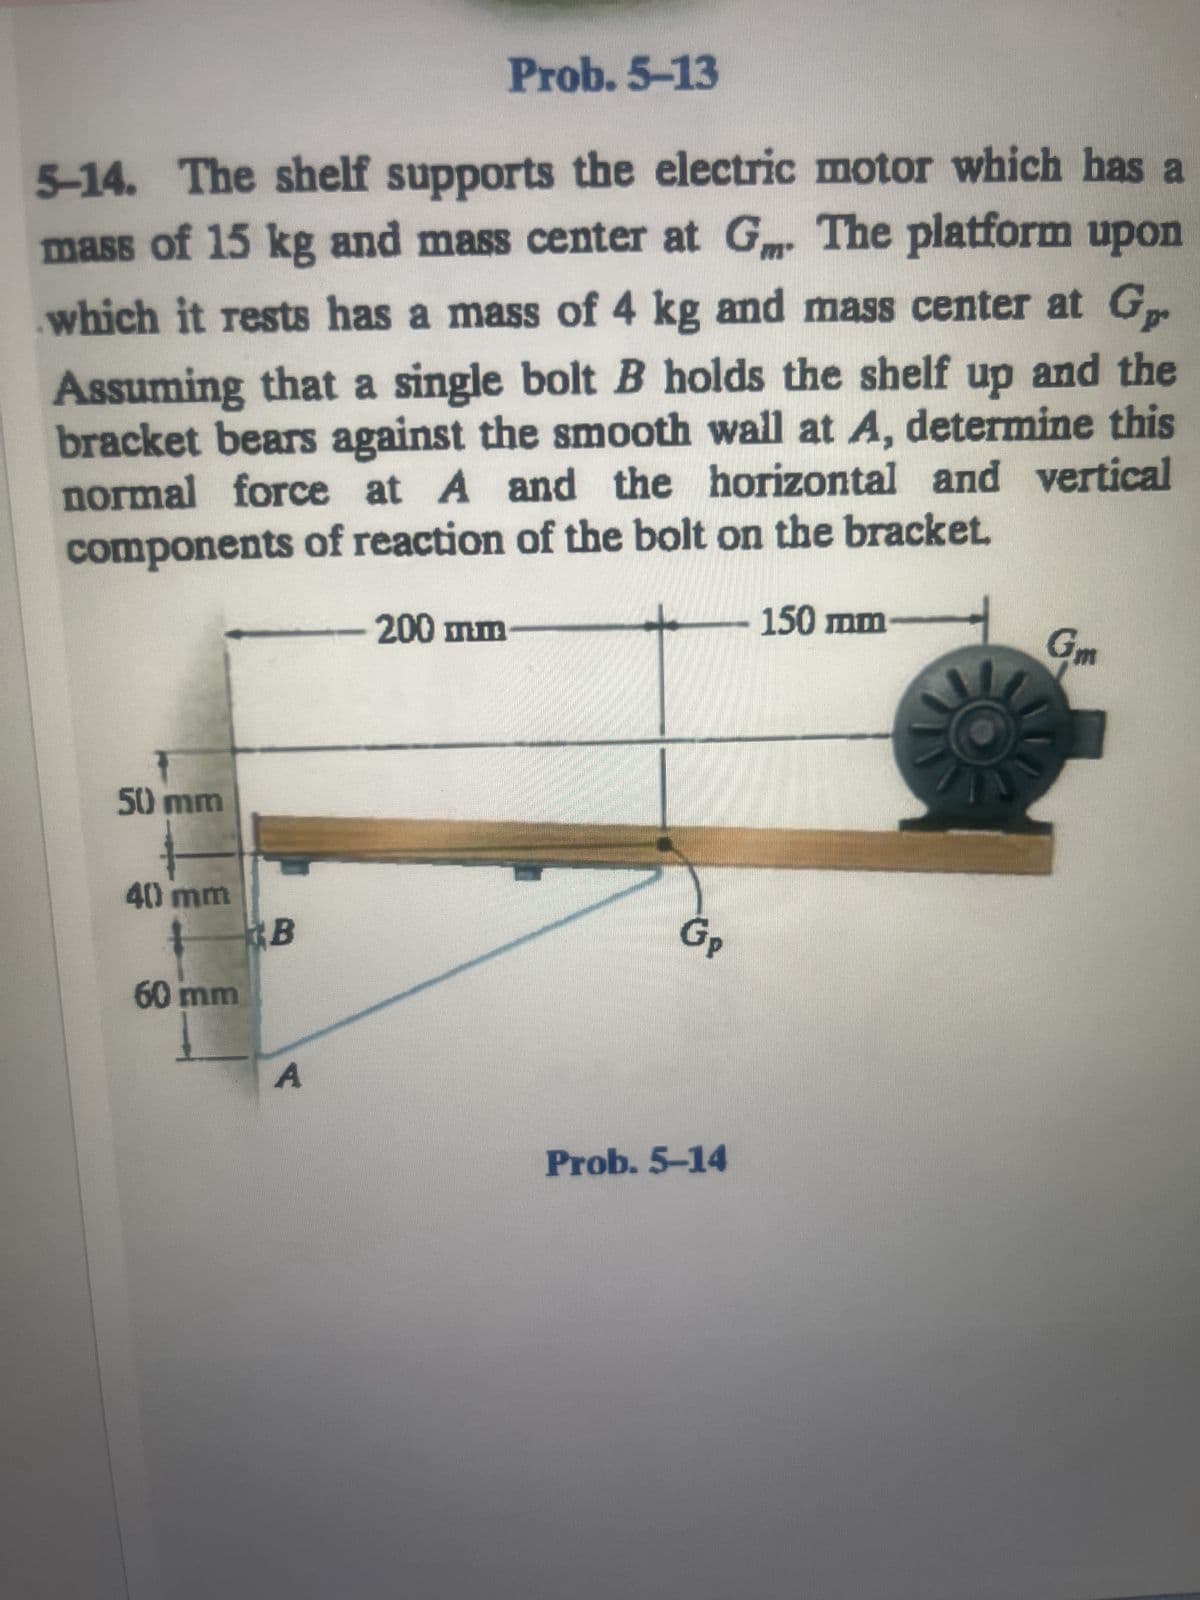 Prob. 5-13
5-14. The shelf supports the electric motor which has a
mass of 15 kg and mass center at Gm. The platform upon
which it rests has a mass of 4 kg and mass center at G
Assuming that a single bolt B holds the shelf up and the
bracket bears against the smooth wall at A, determine this
normal force at A and the horizontal and vertical
components of reaction of the bolt on the bracket.
50 mm
40 mm
60 mm
B
A
200 mm
GP
Prob. 5-14
150 mm